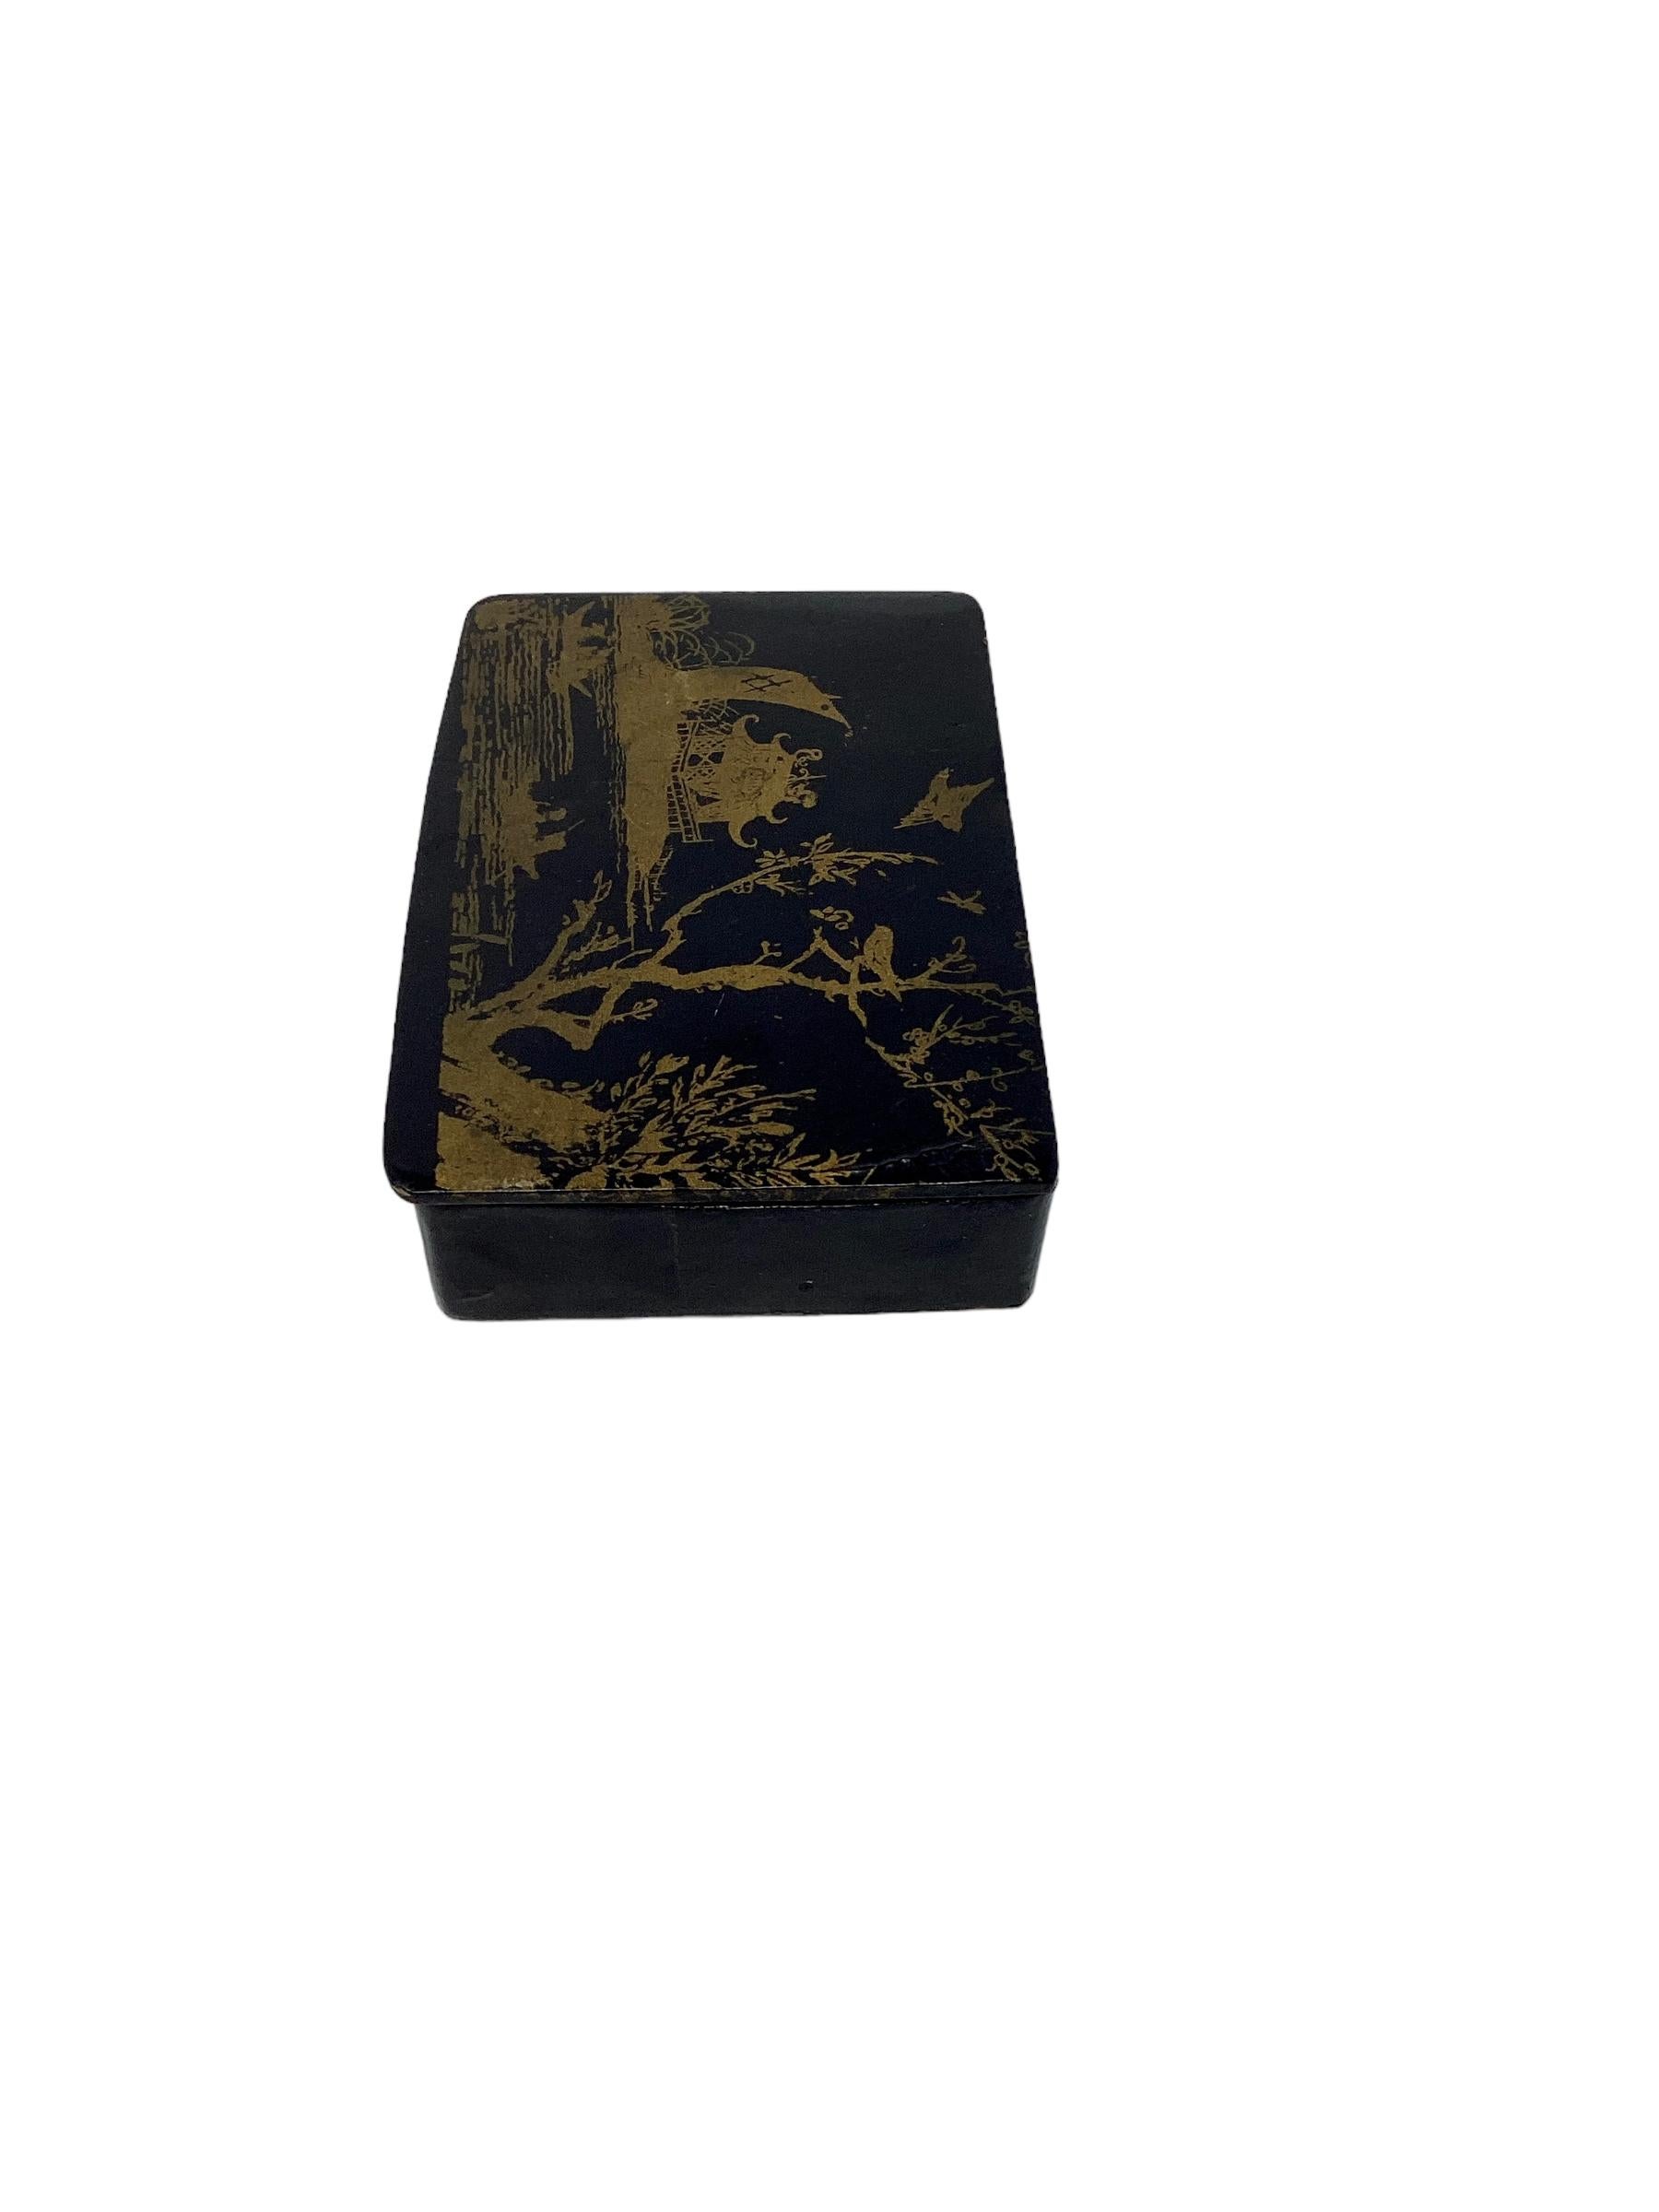 Vintage French Chinoiserie Lacquer Box For Sale 1